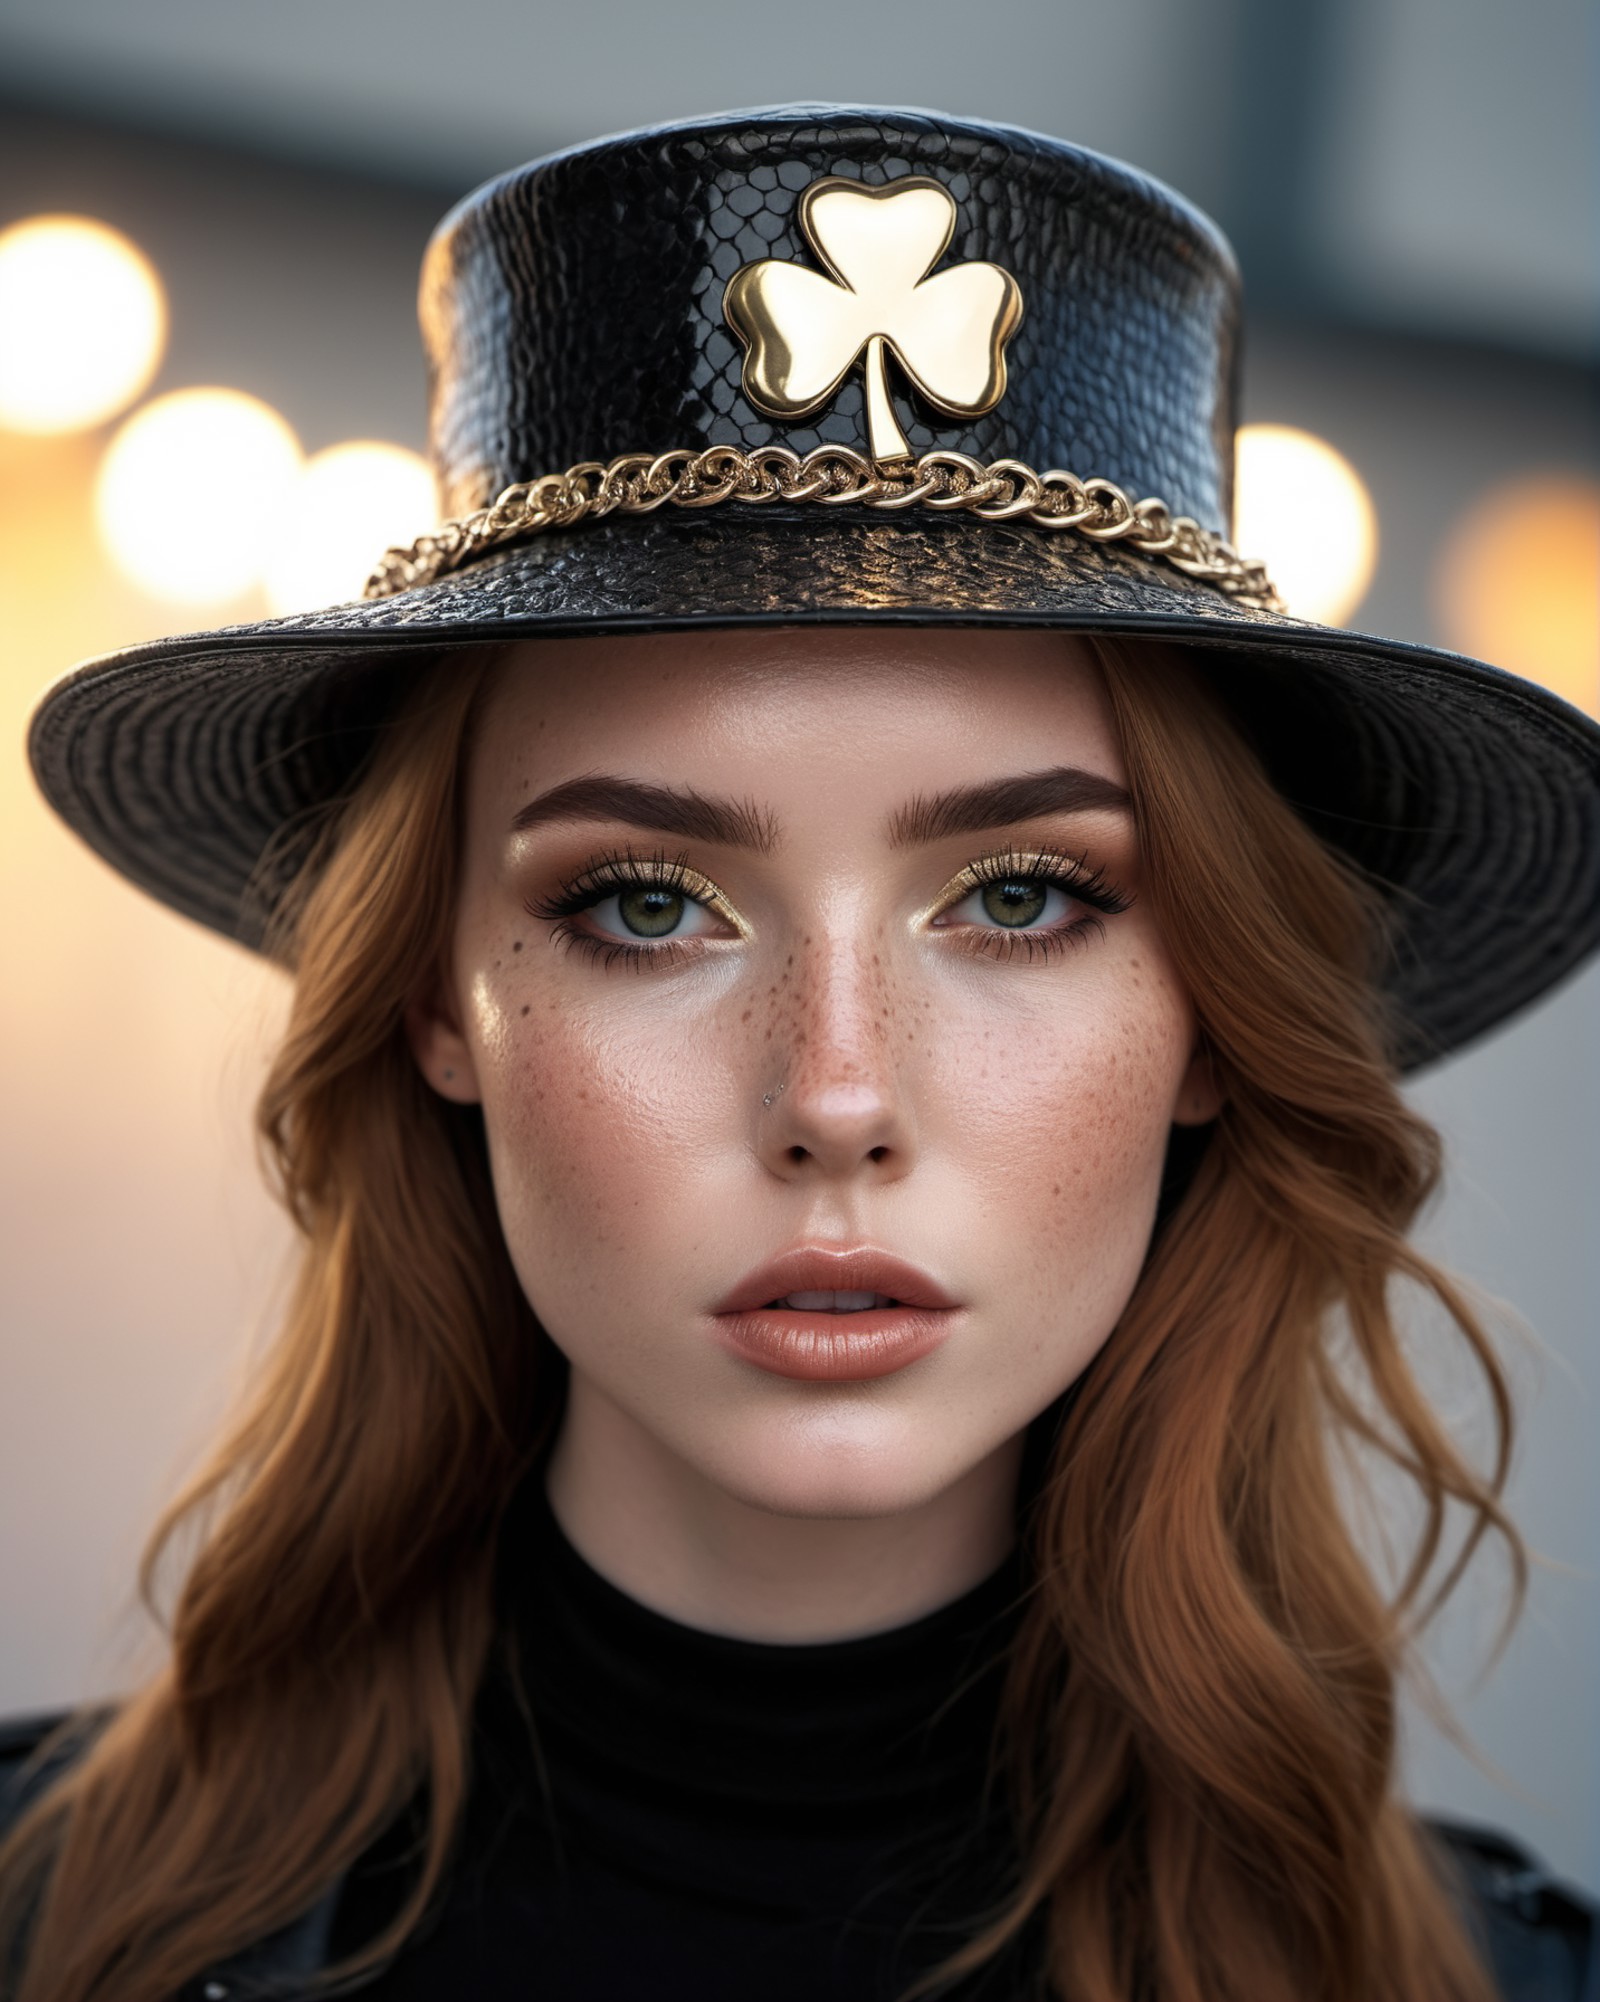 4K photograph of a Irish model wearing a hat posing for a picture, in the style of oshare kei, black, wide lens, shiny/ gl...